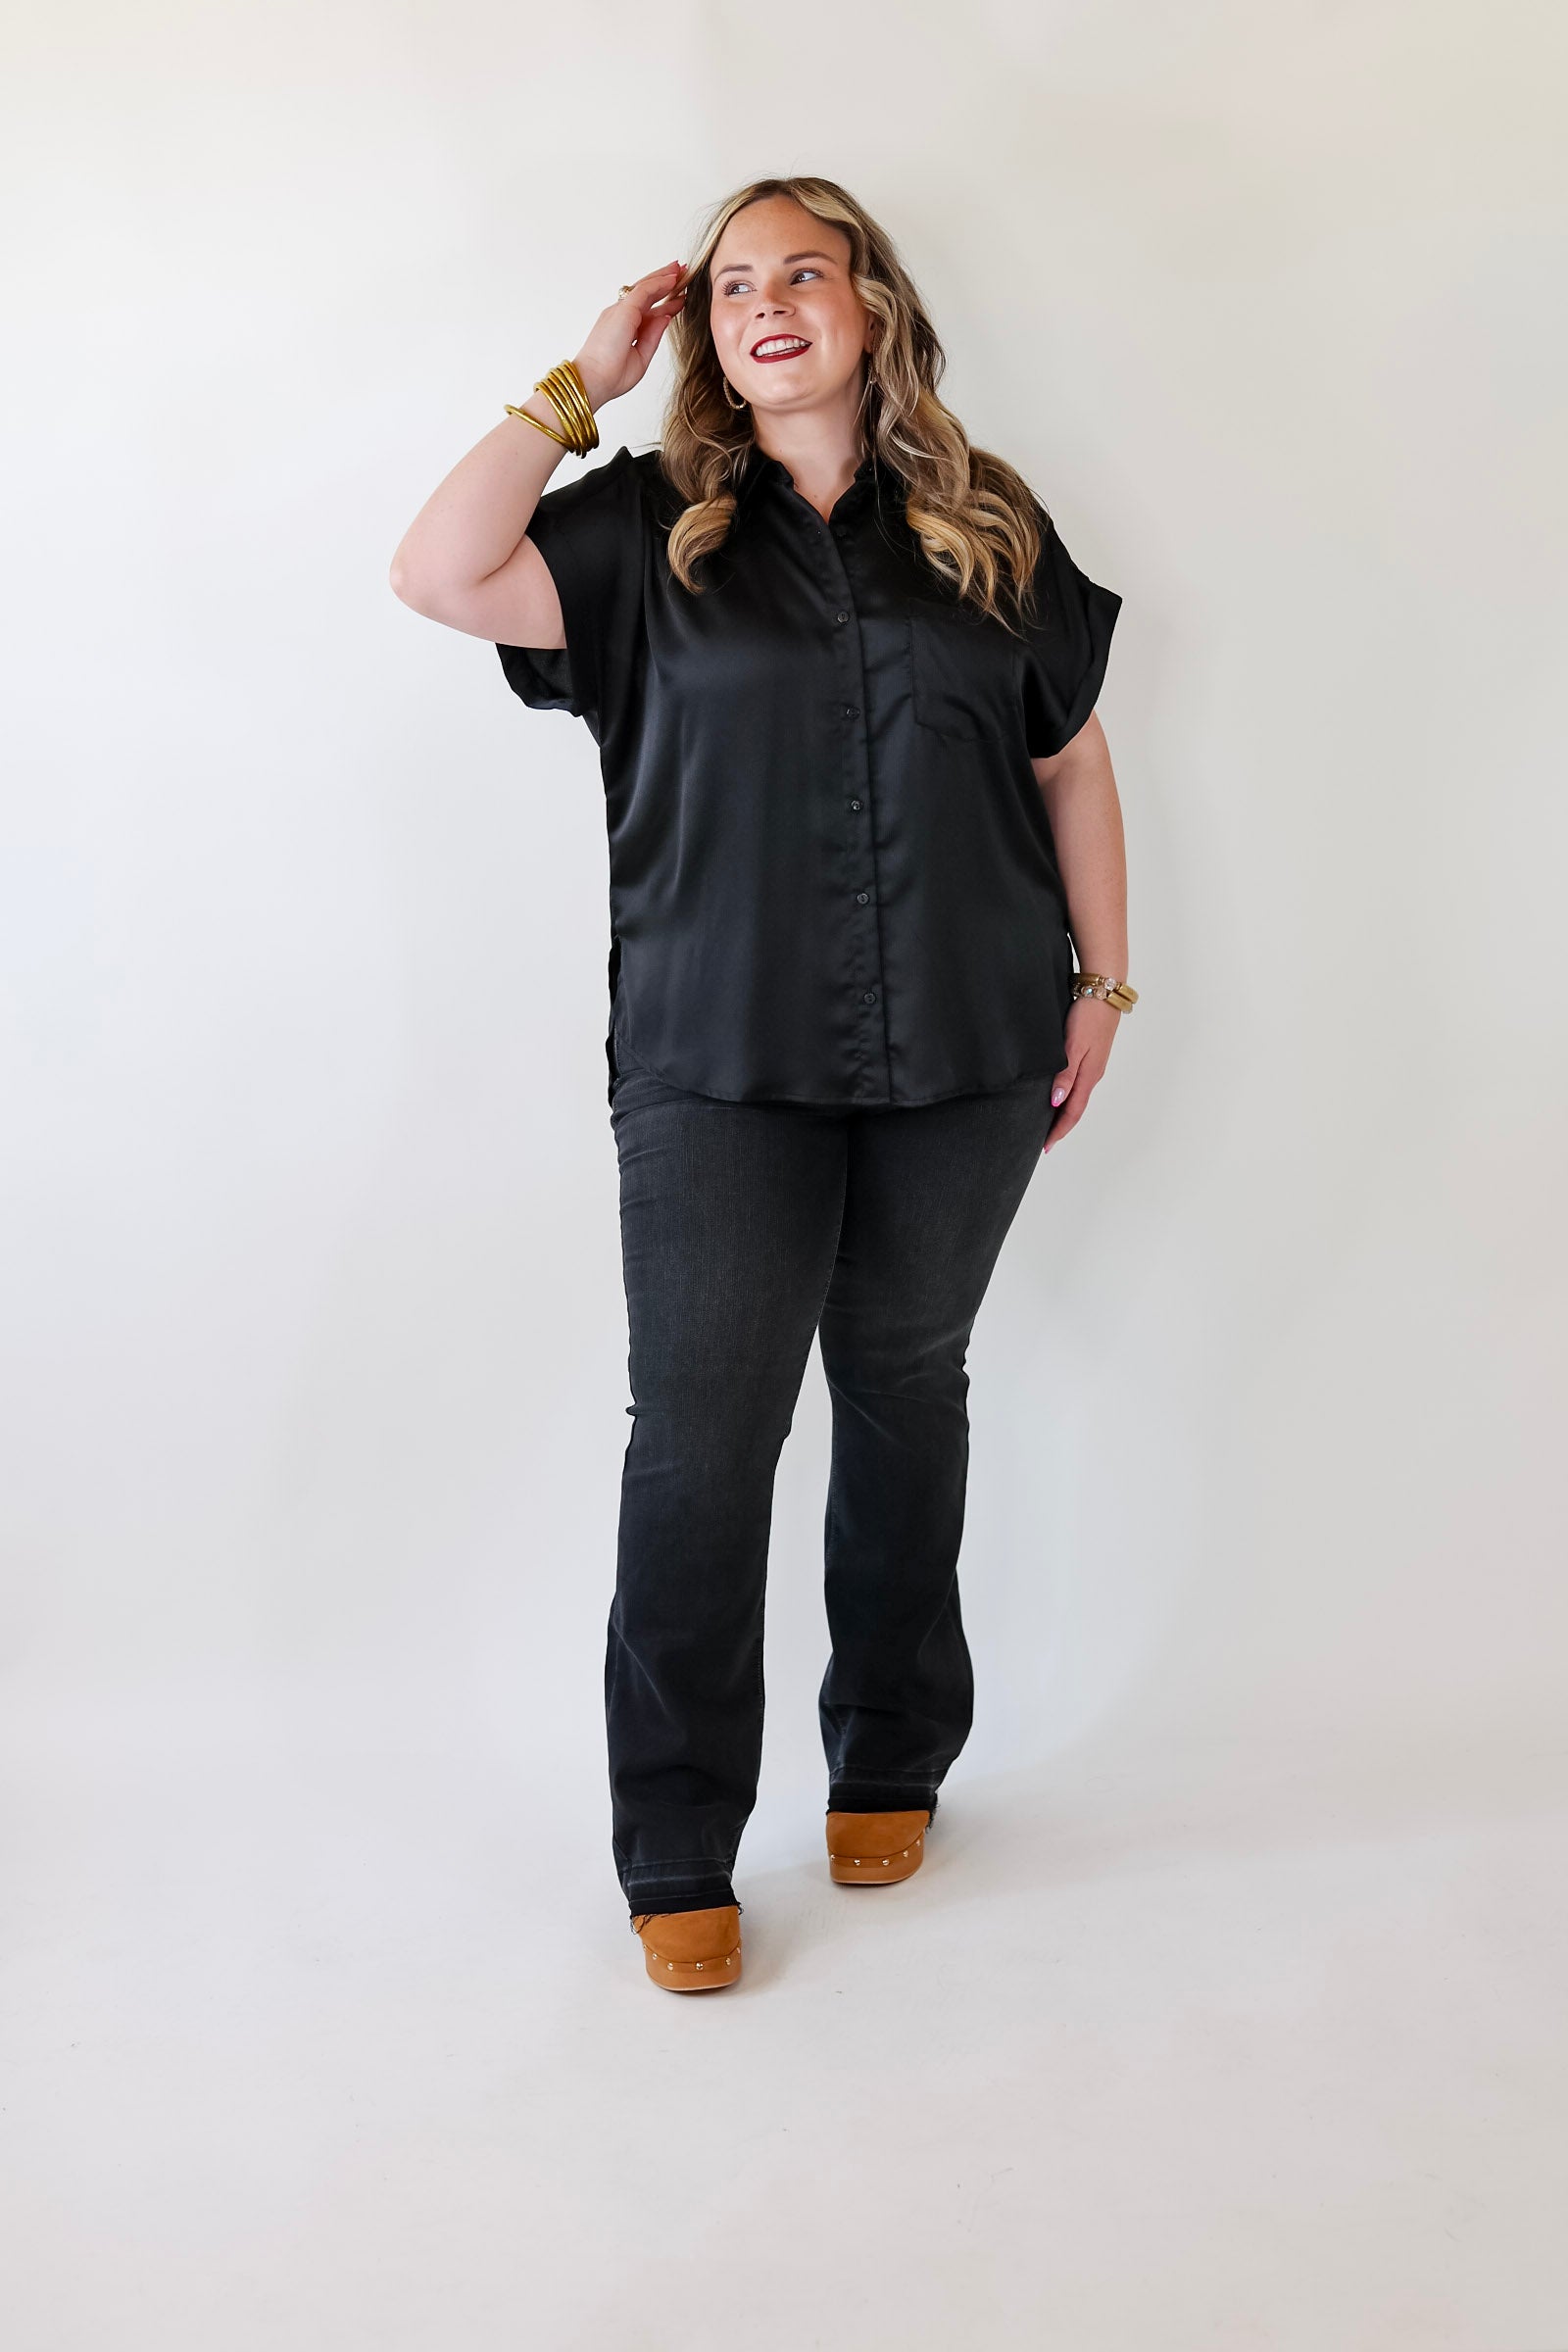 Free To Be Fab Button Up Short Sleeve Top in Black - Giddy Up Glamour Boutique